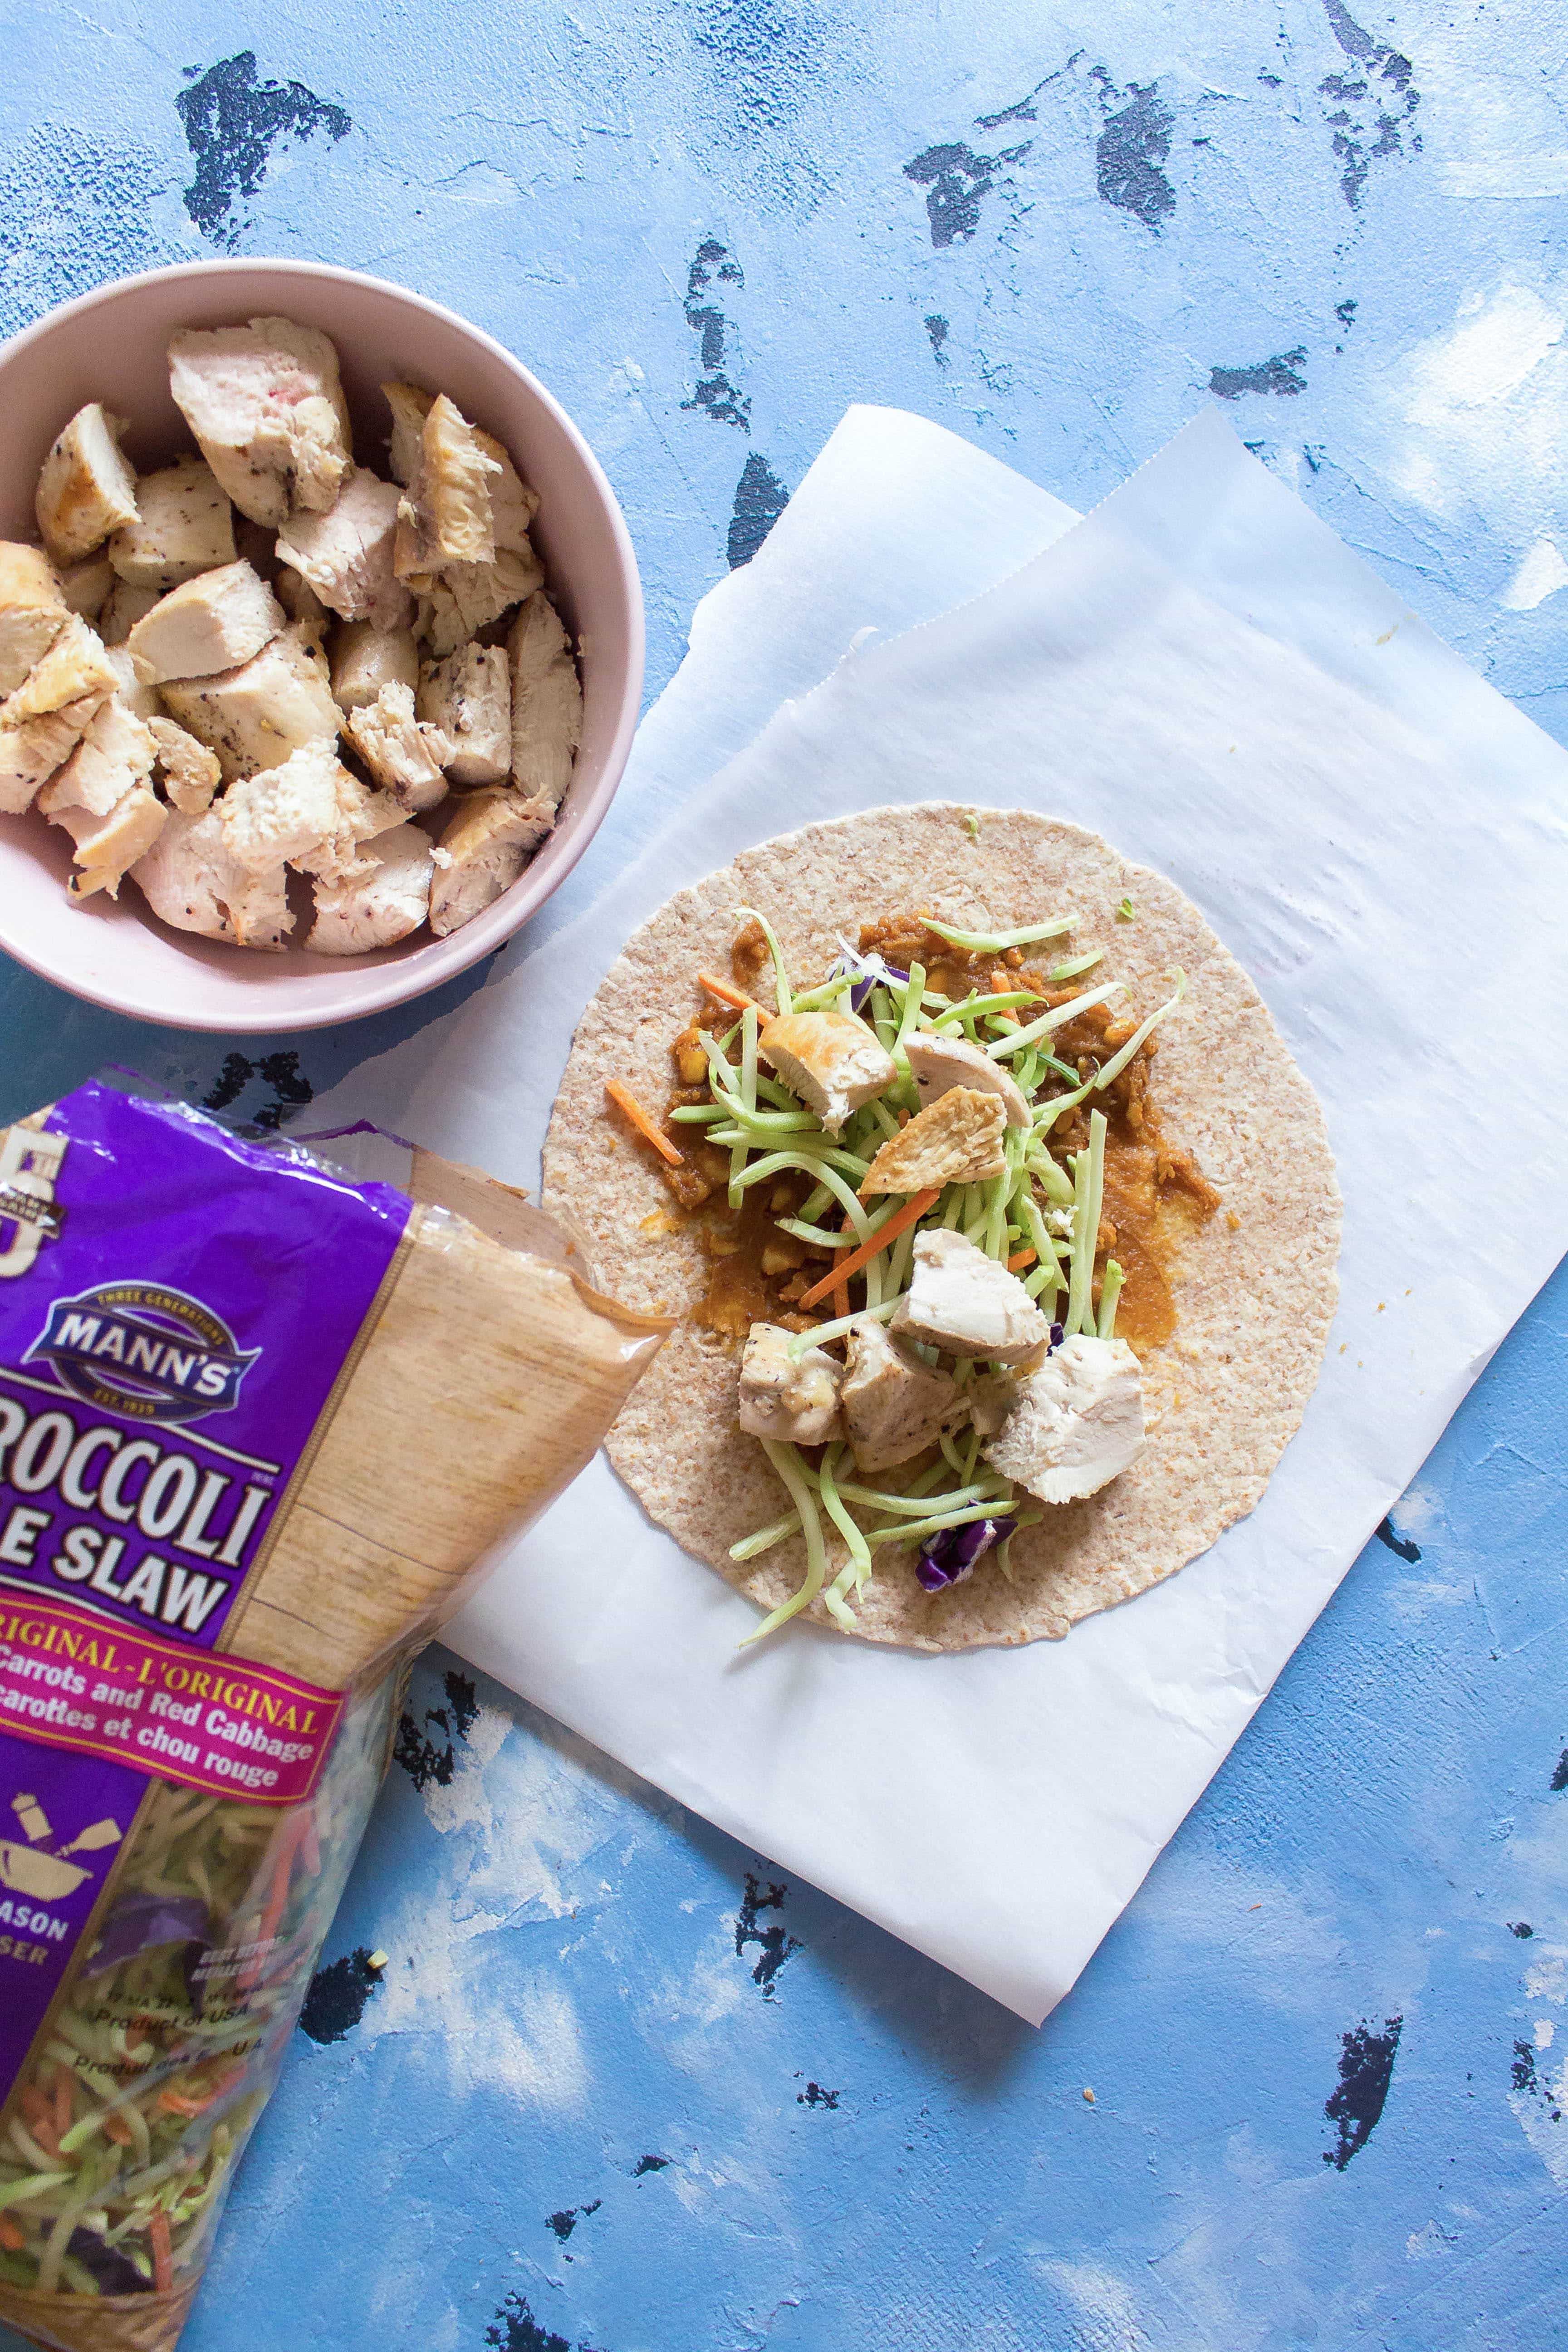  chicken wrap recipes for lunch are the perfect item to bring to work or school. simple healthy wraps for lunch with spicy peanut slaw.